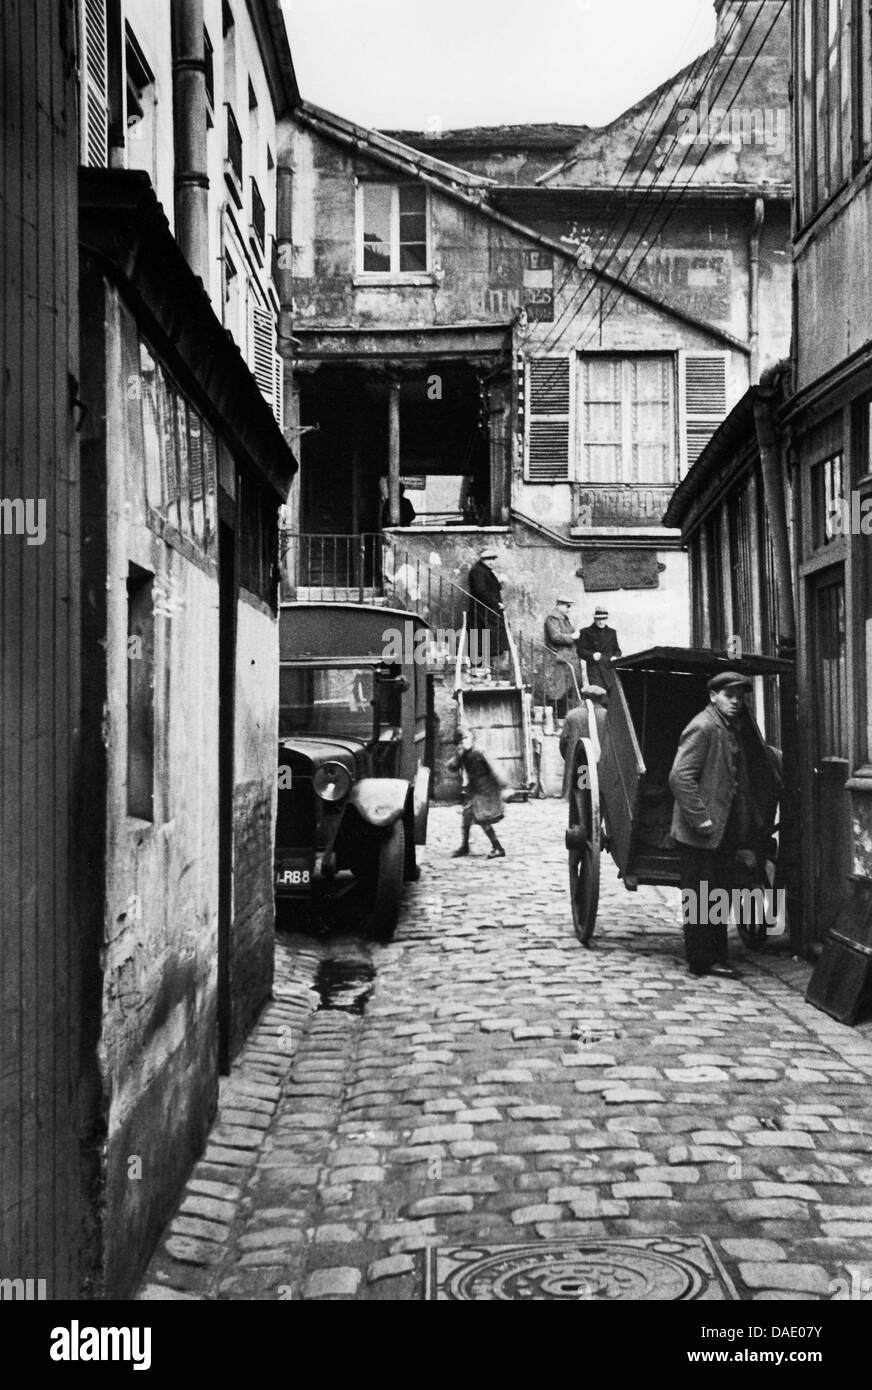 Paris 1935, alley. Image by photographer Fred Stein (1909-1967) who emigrated 1933 from Nazi Germany to France and finally to the USA. Stock Photo